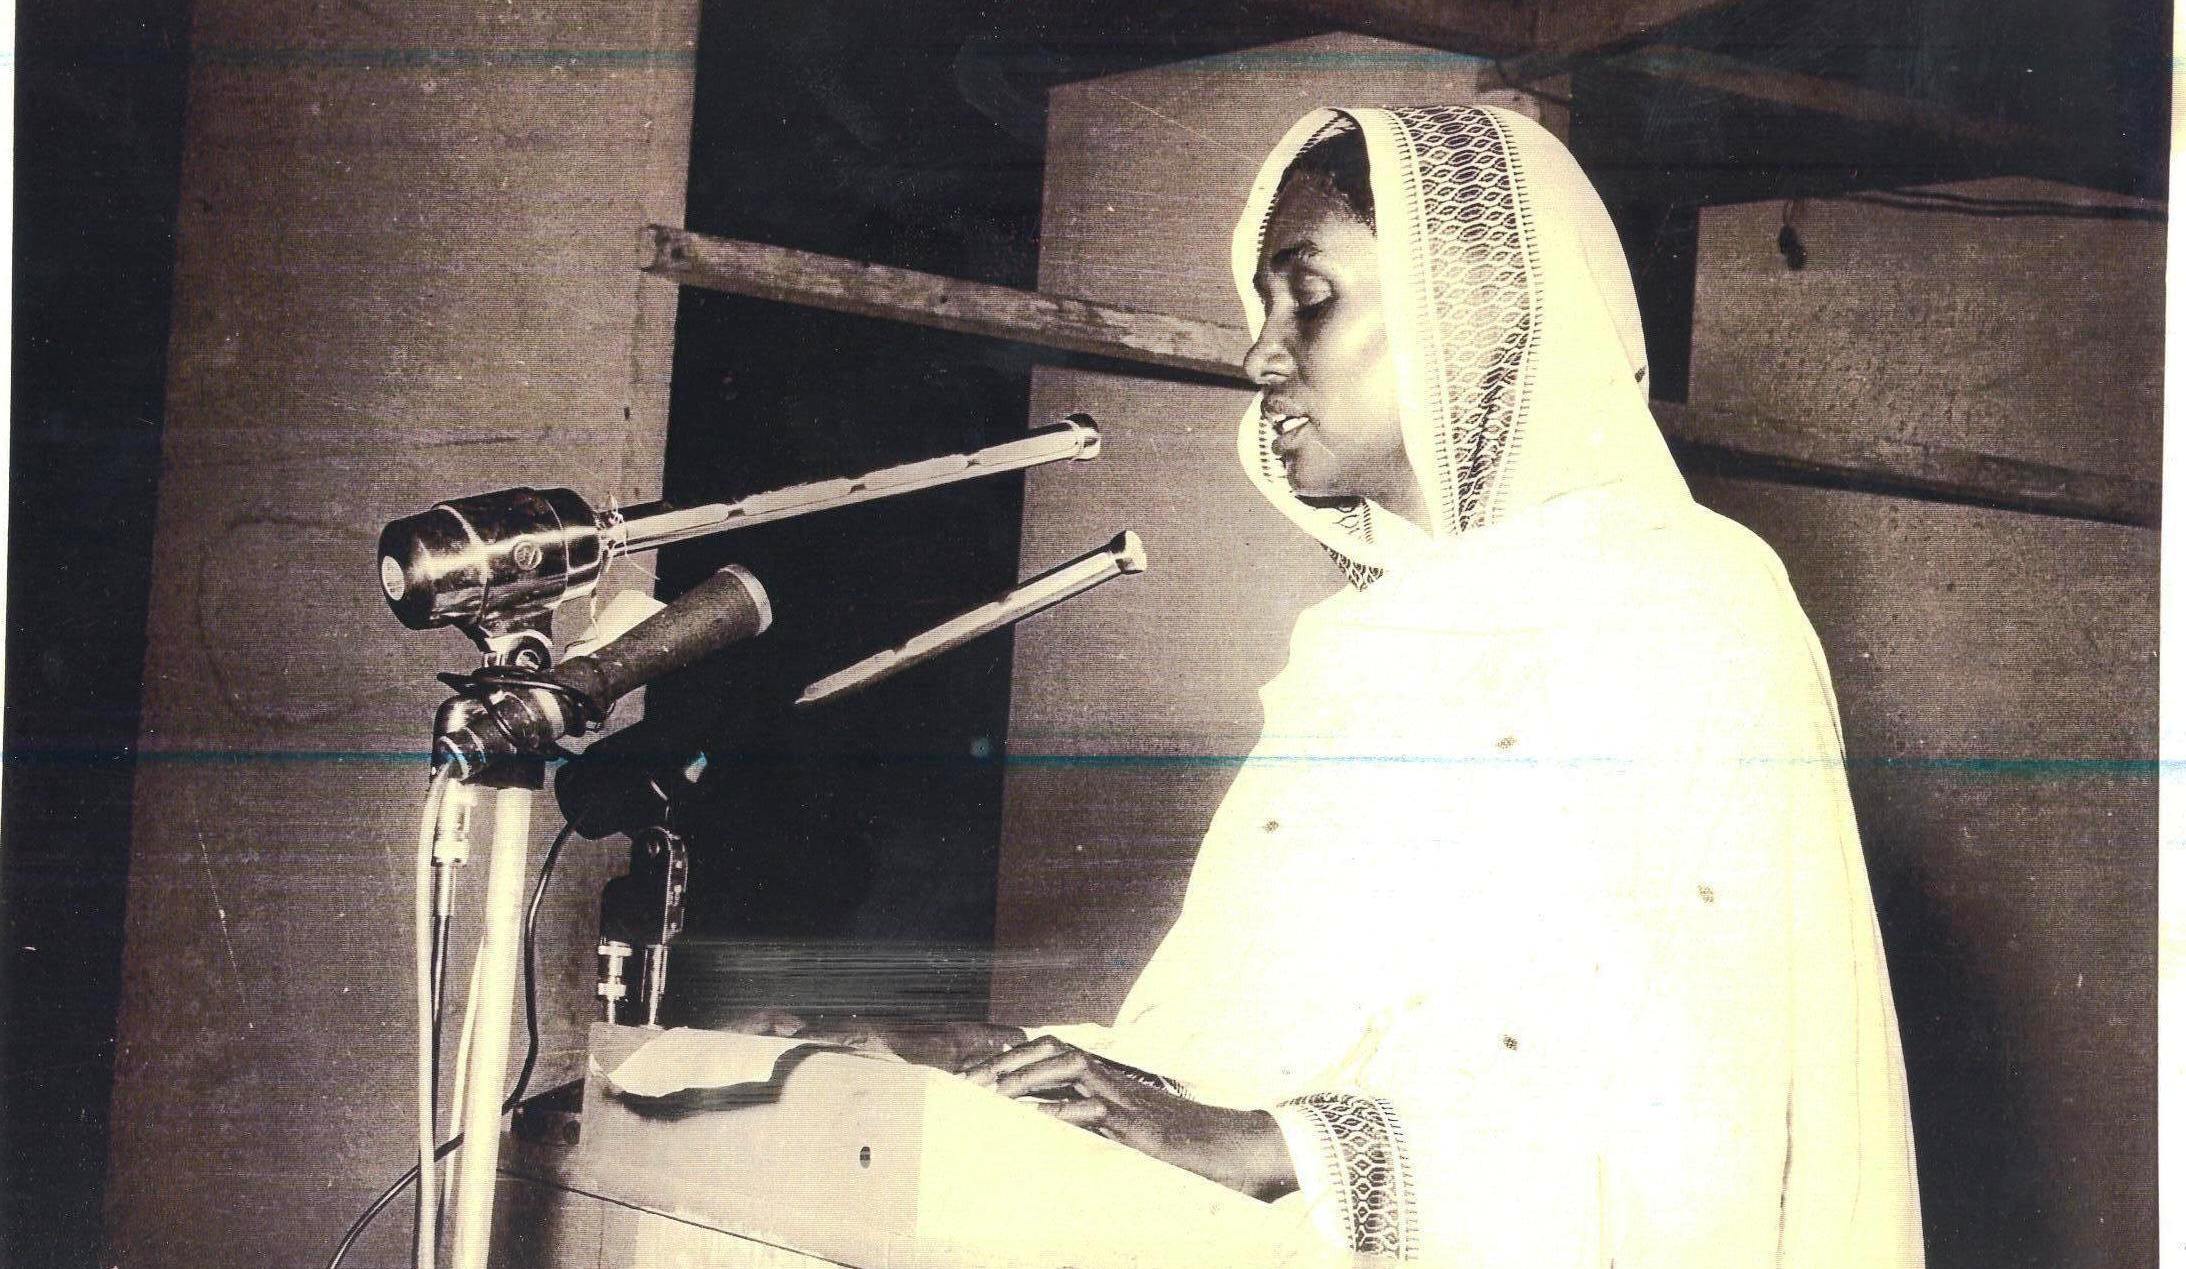 Sudan's first female politician and human rights activist Fatima Ahmed Ibrahim, winner of the Ibn Rushd Prize for Freedom of Thought 2006 (source: Ibn Rushd Fund for Freedom of Thought)